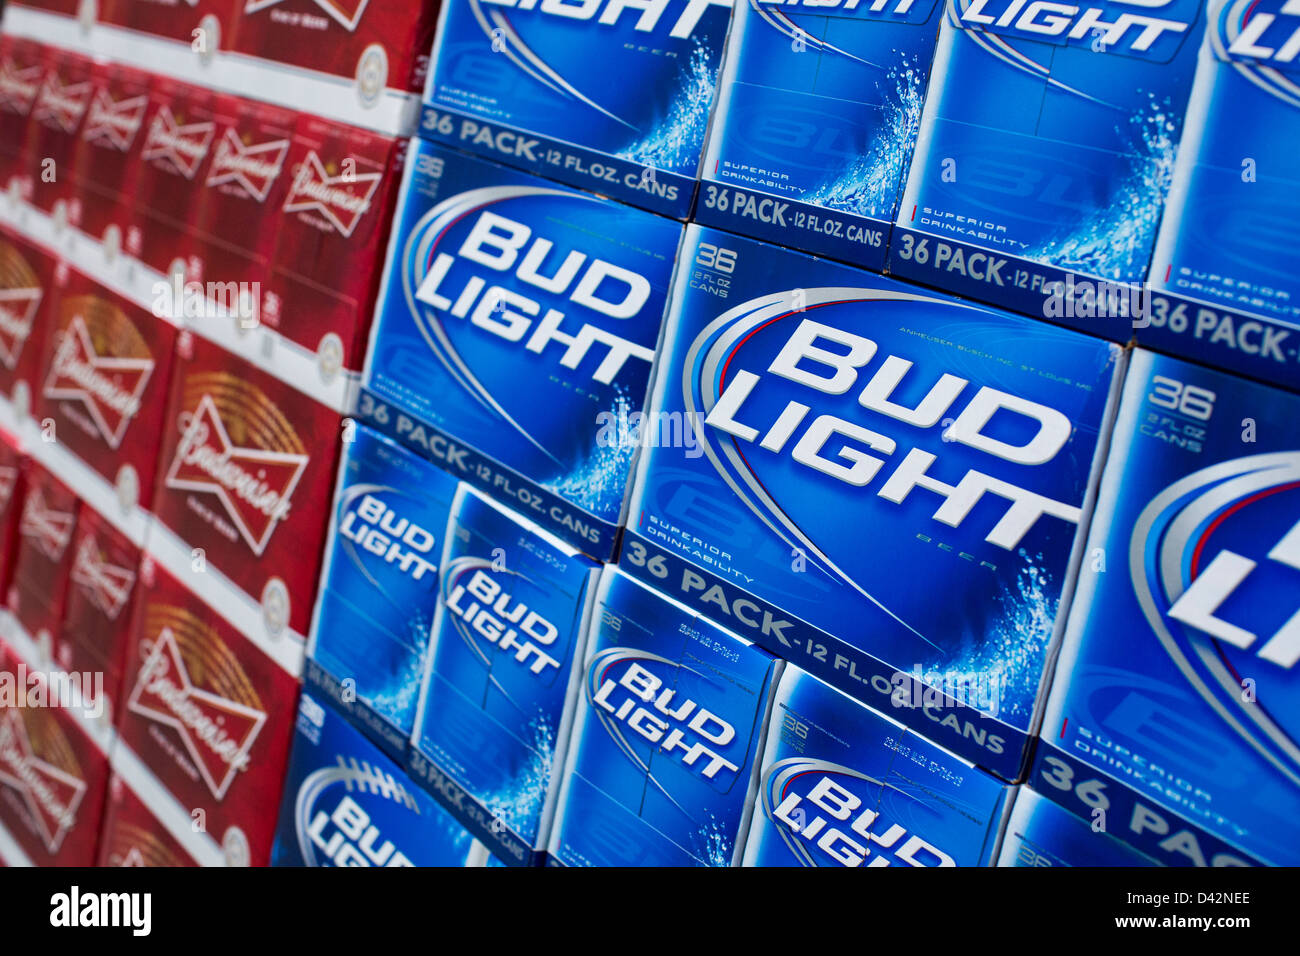 Budweiser and Bud Light beer on display at a Costco Wholesale Warehouse Club. Stock Photo